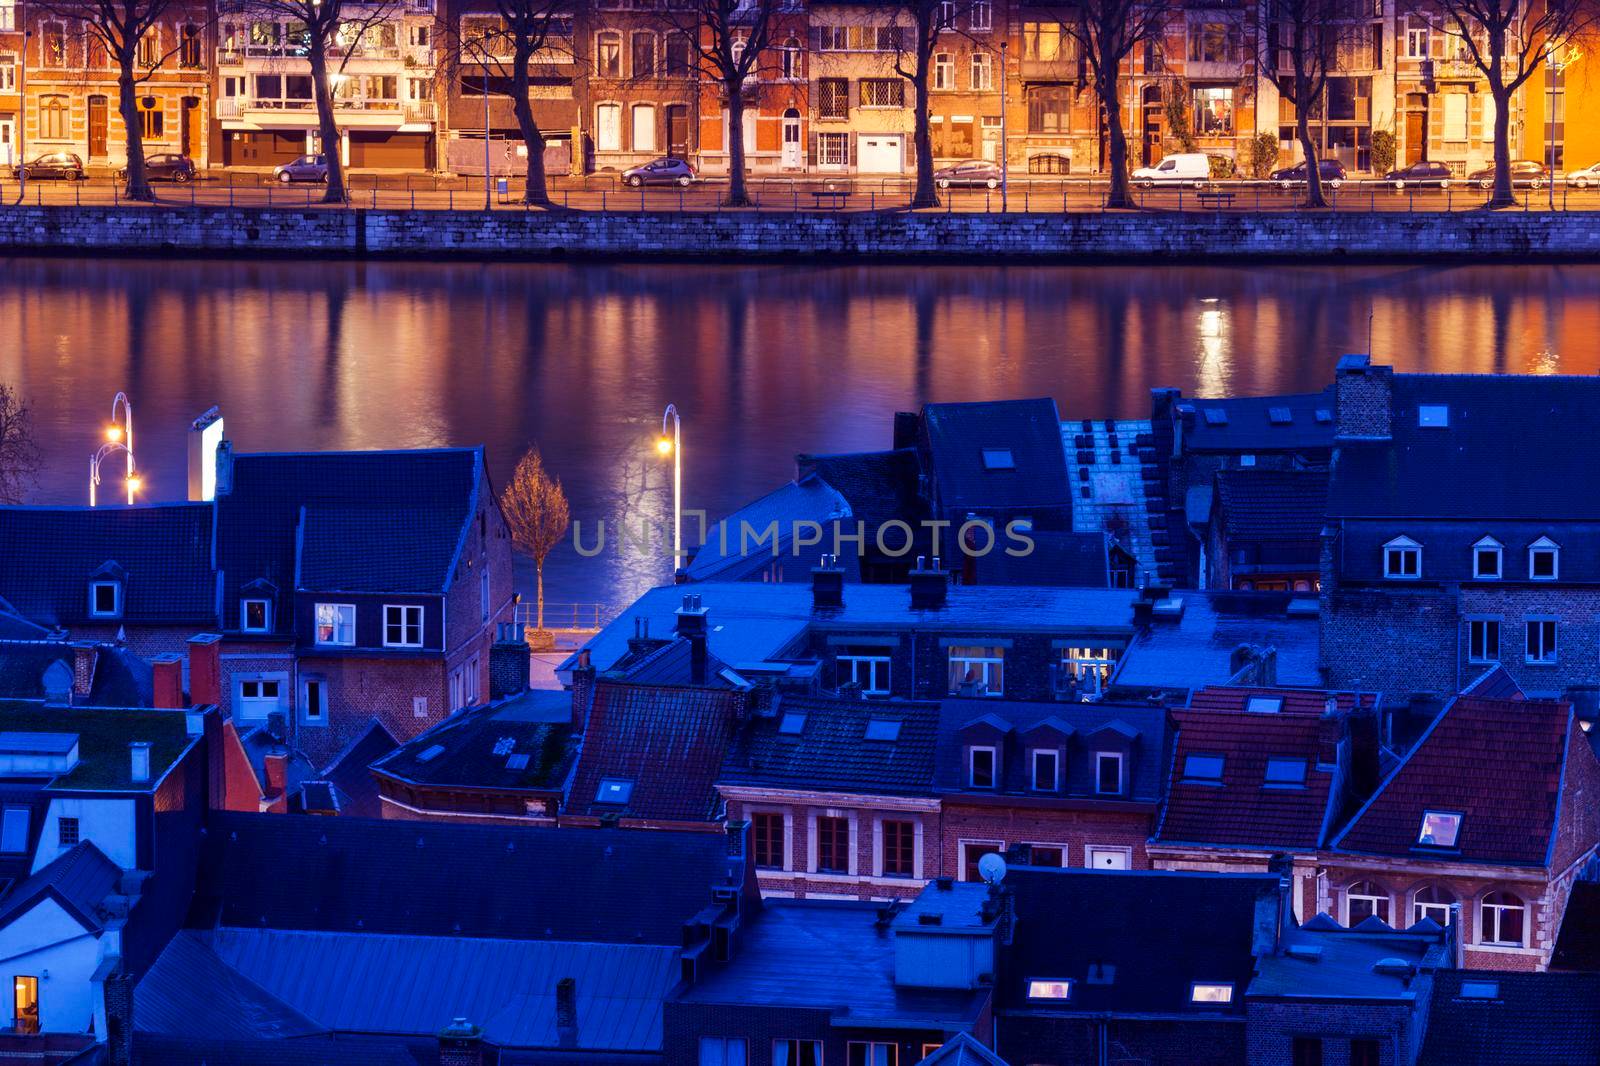 Architecture of Liege along Meuse River by benkrut